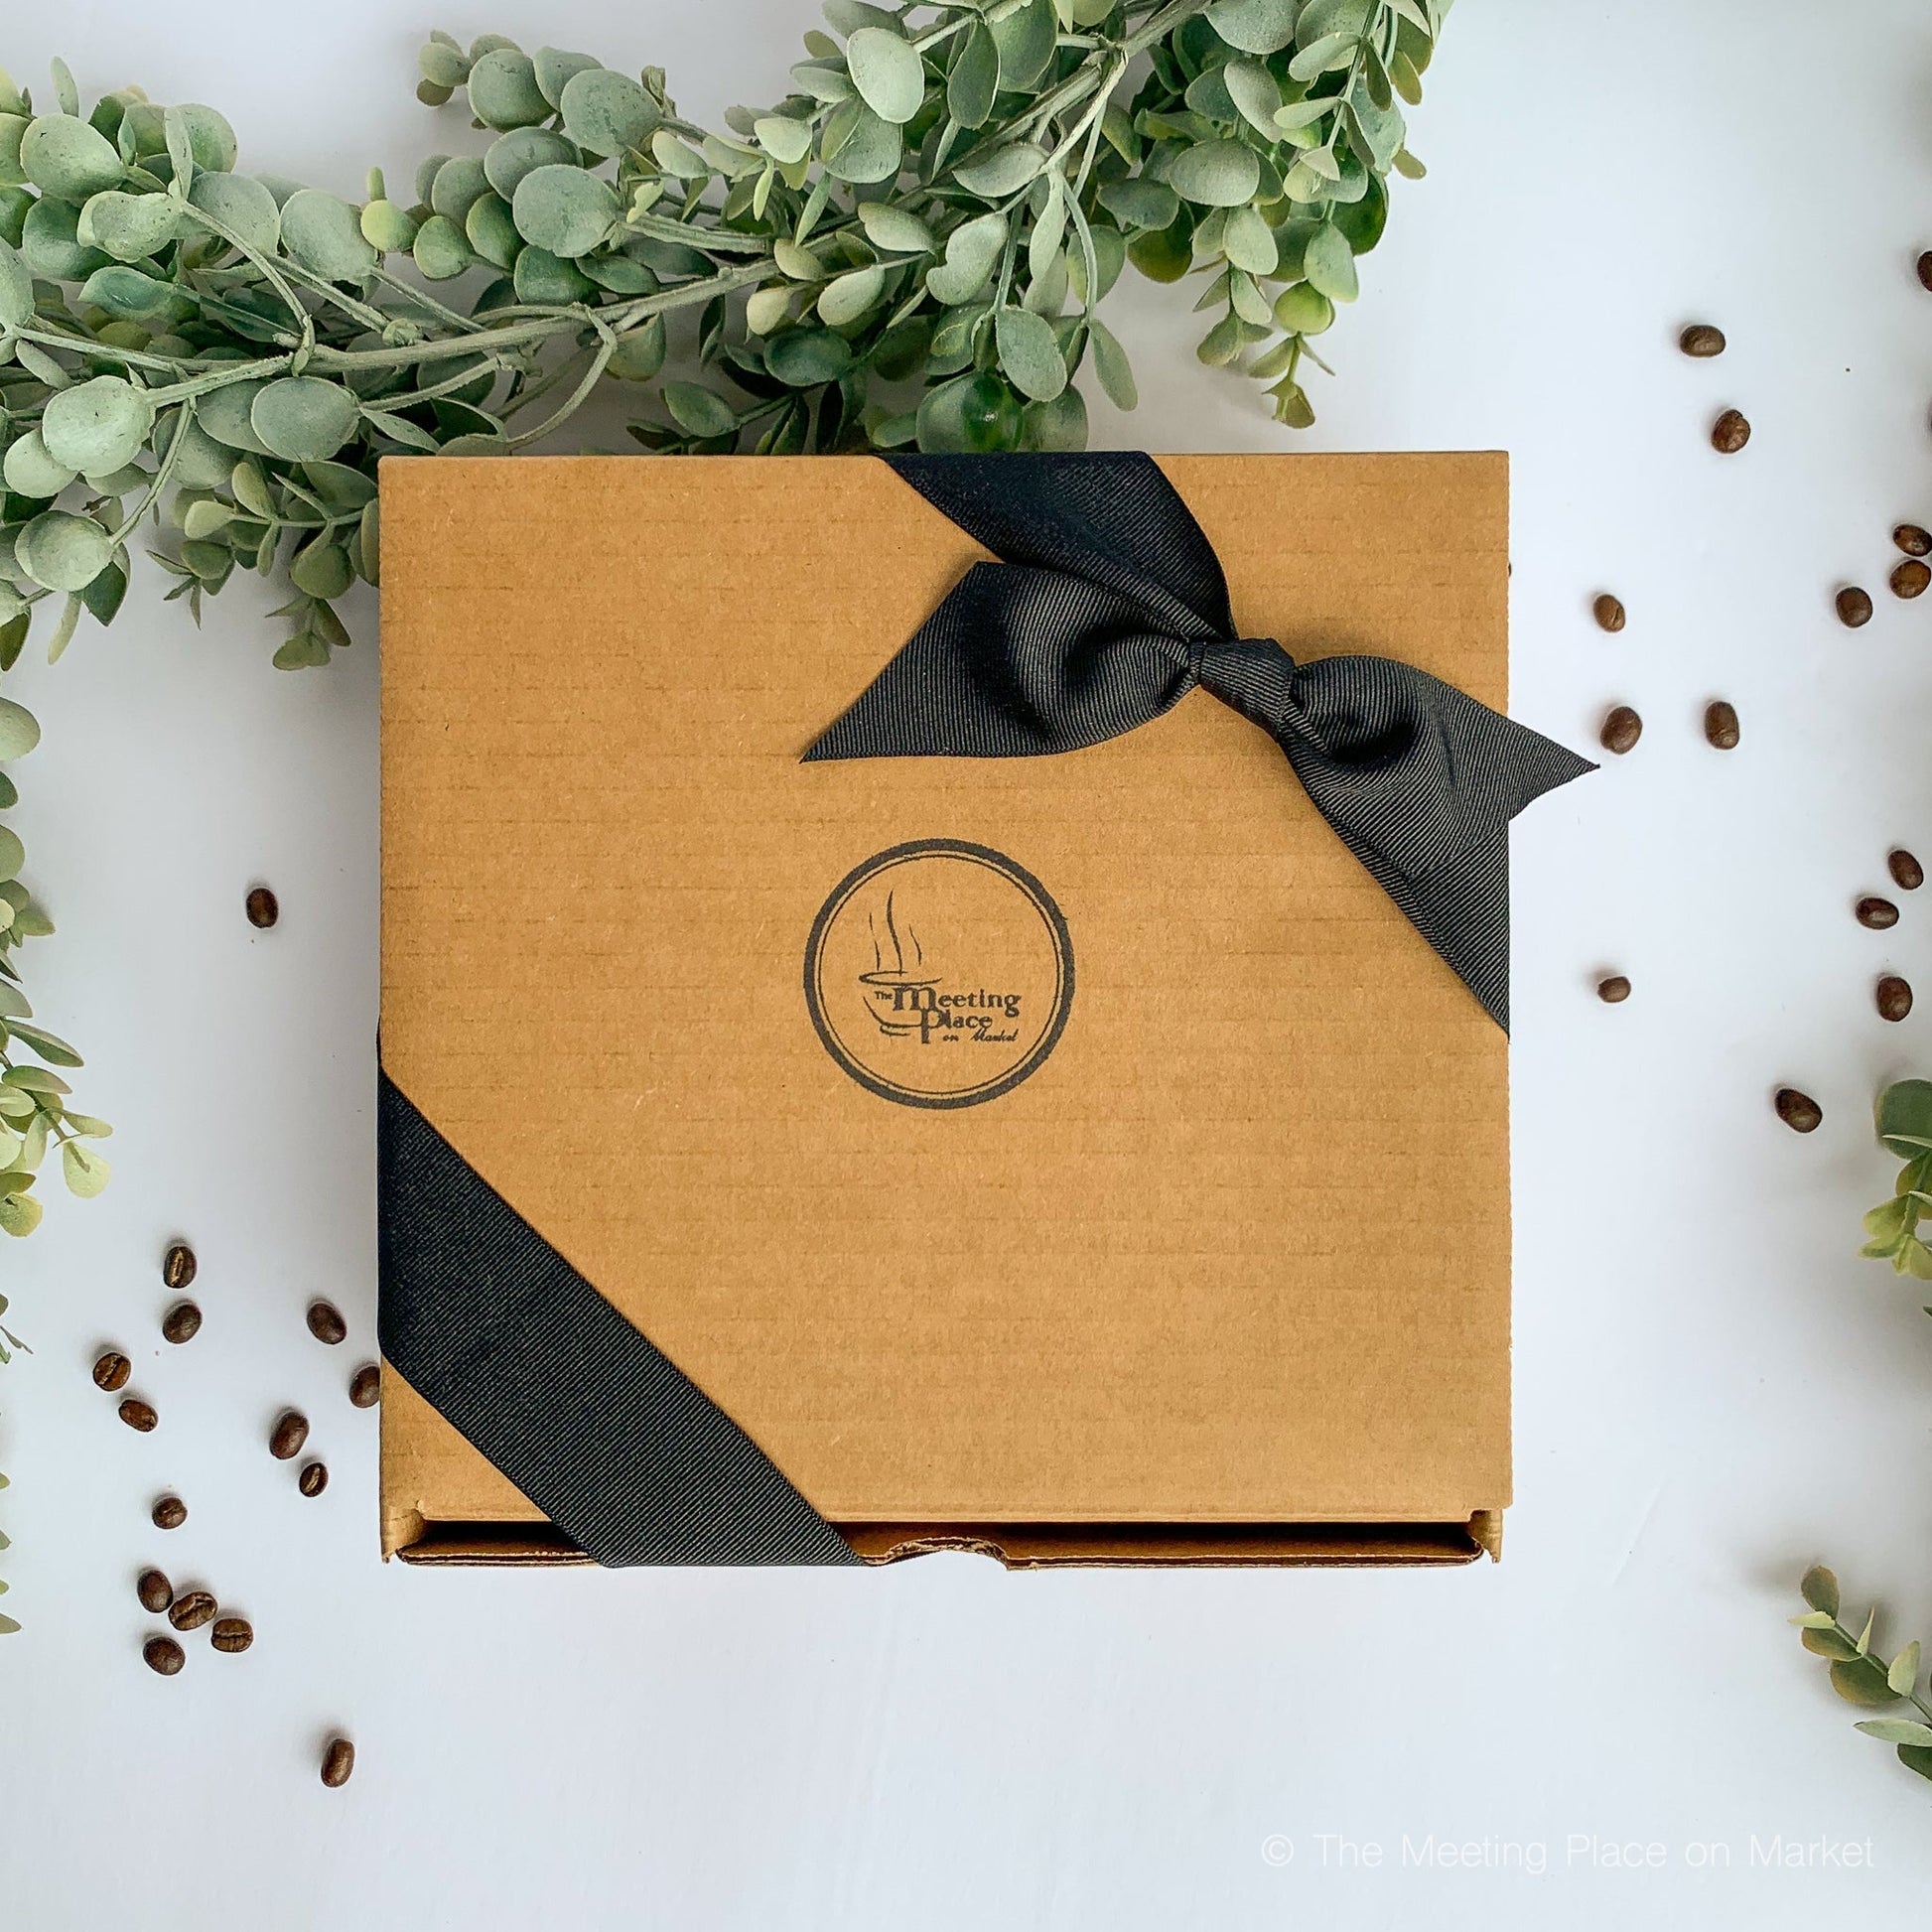 Perfect Pairing Honey & Tea Gift Box Thinking of You Gift - The Meeting Place on Market